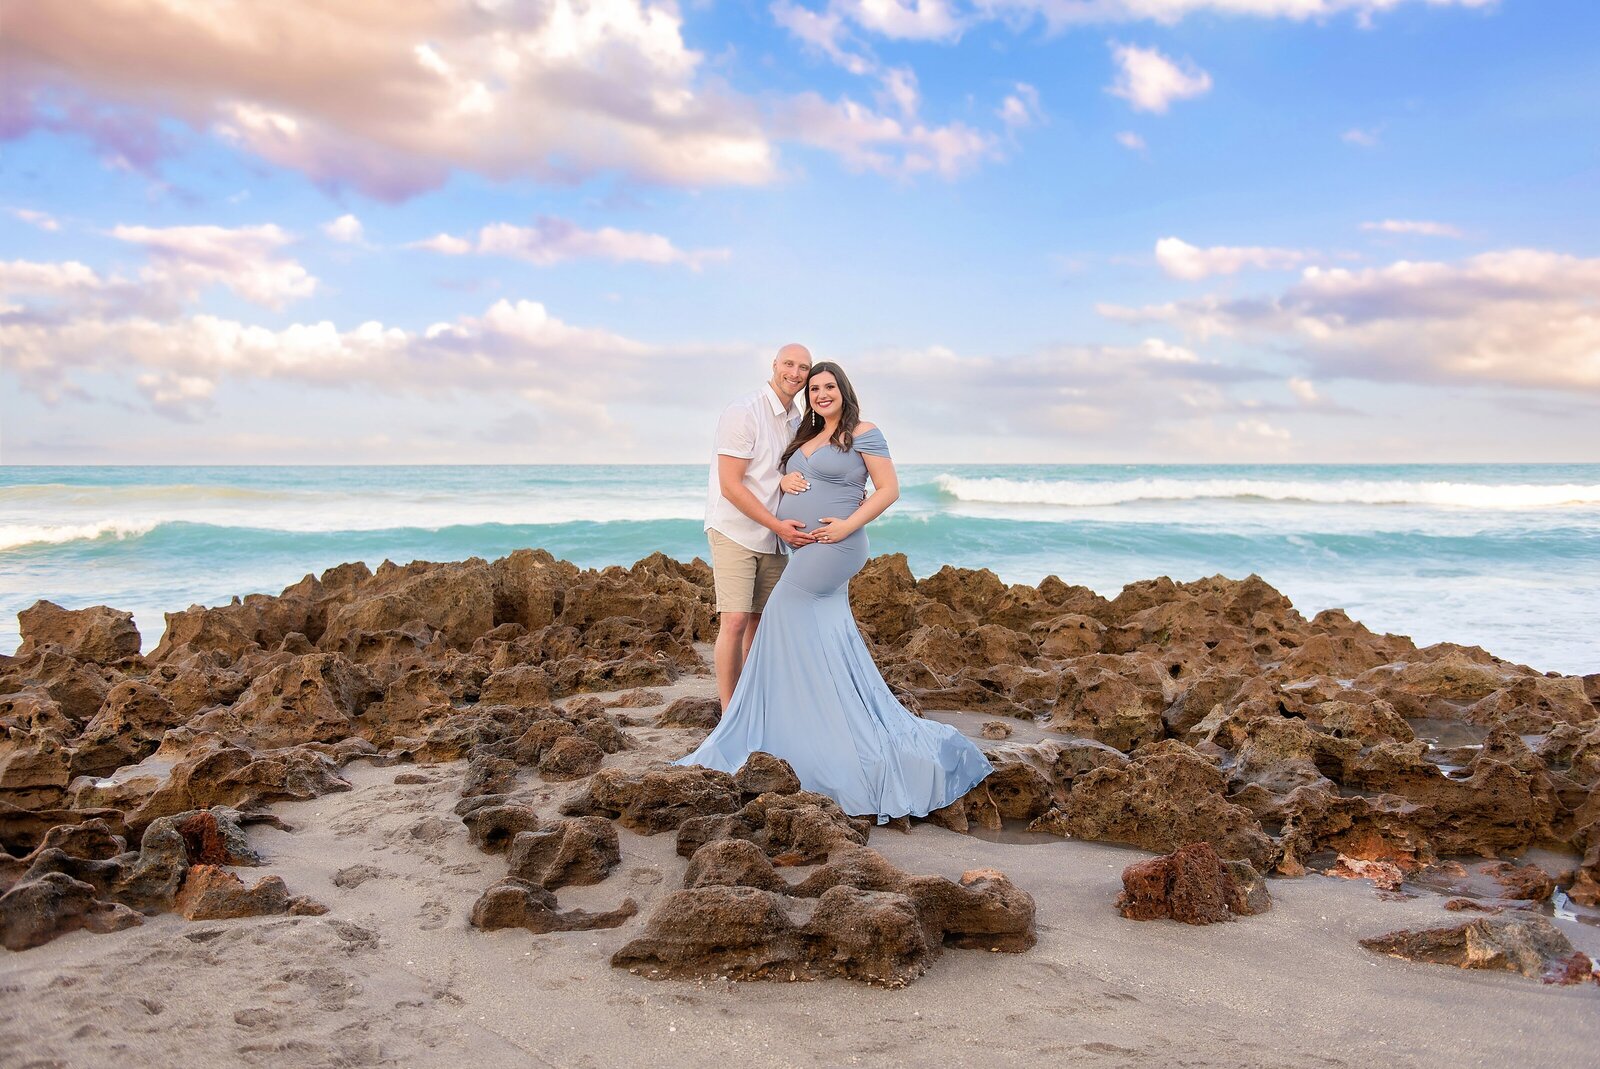 Pregnant wife happily posing with her husband on the beach for their maternity photoshoot at sunset in Jupiter, FL.